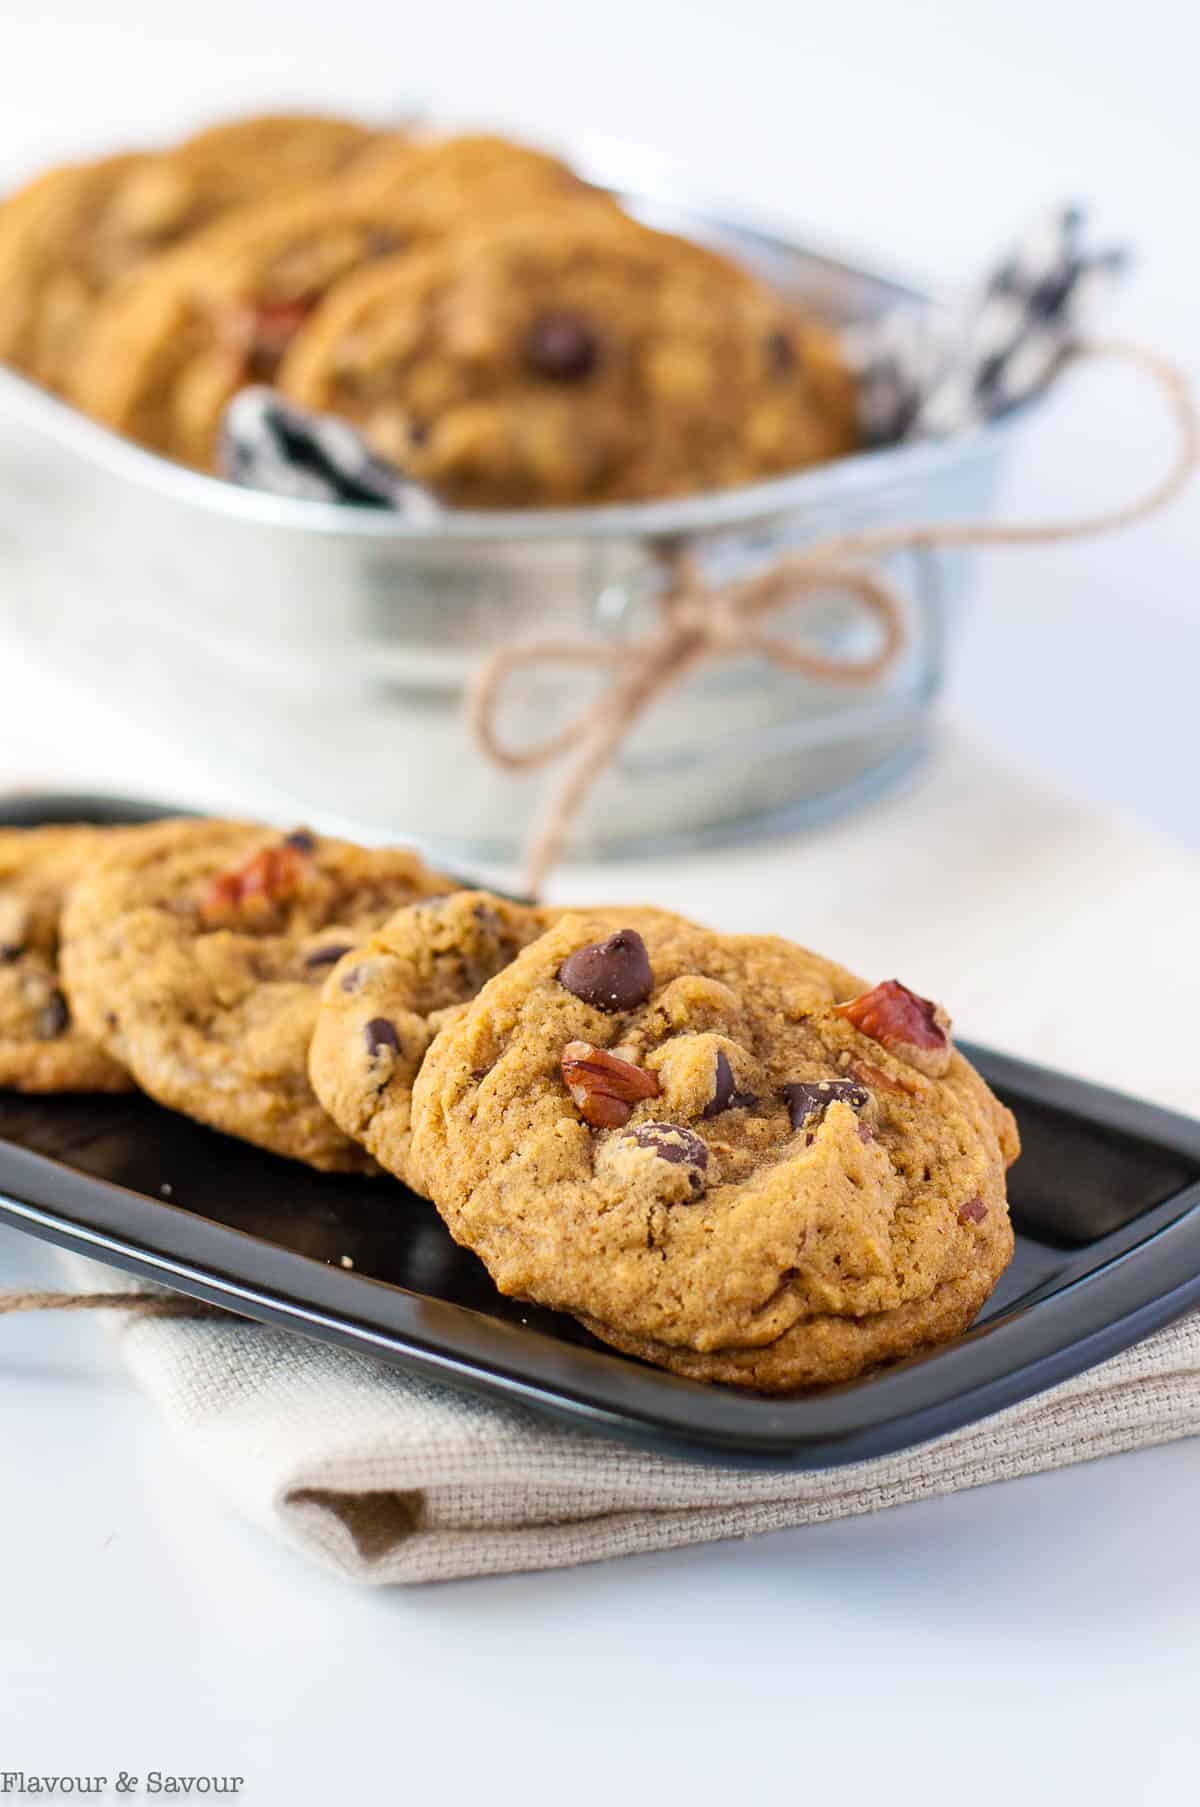 Pumpkin pecan chocolate chip cookies on a rectangular black plate with a metal basket of cookies in the background.